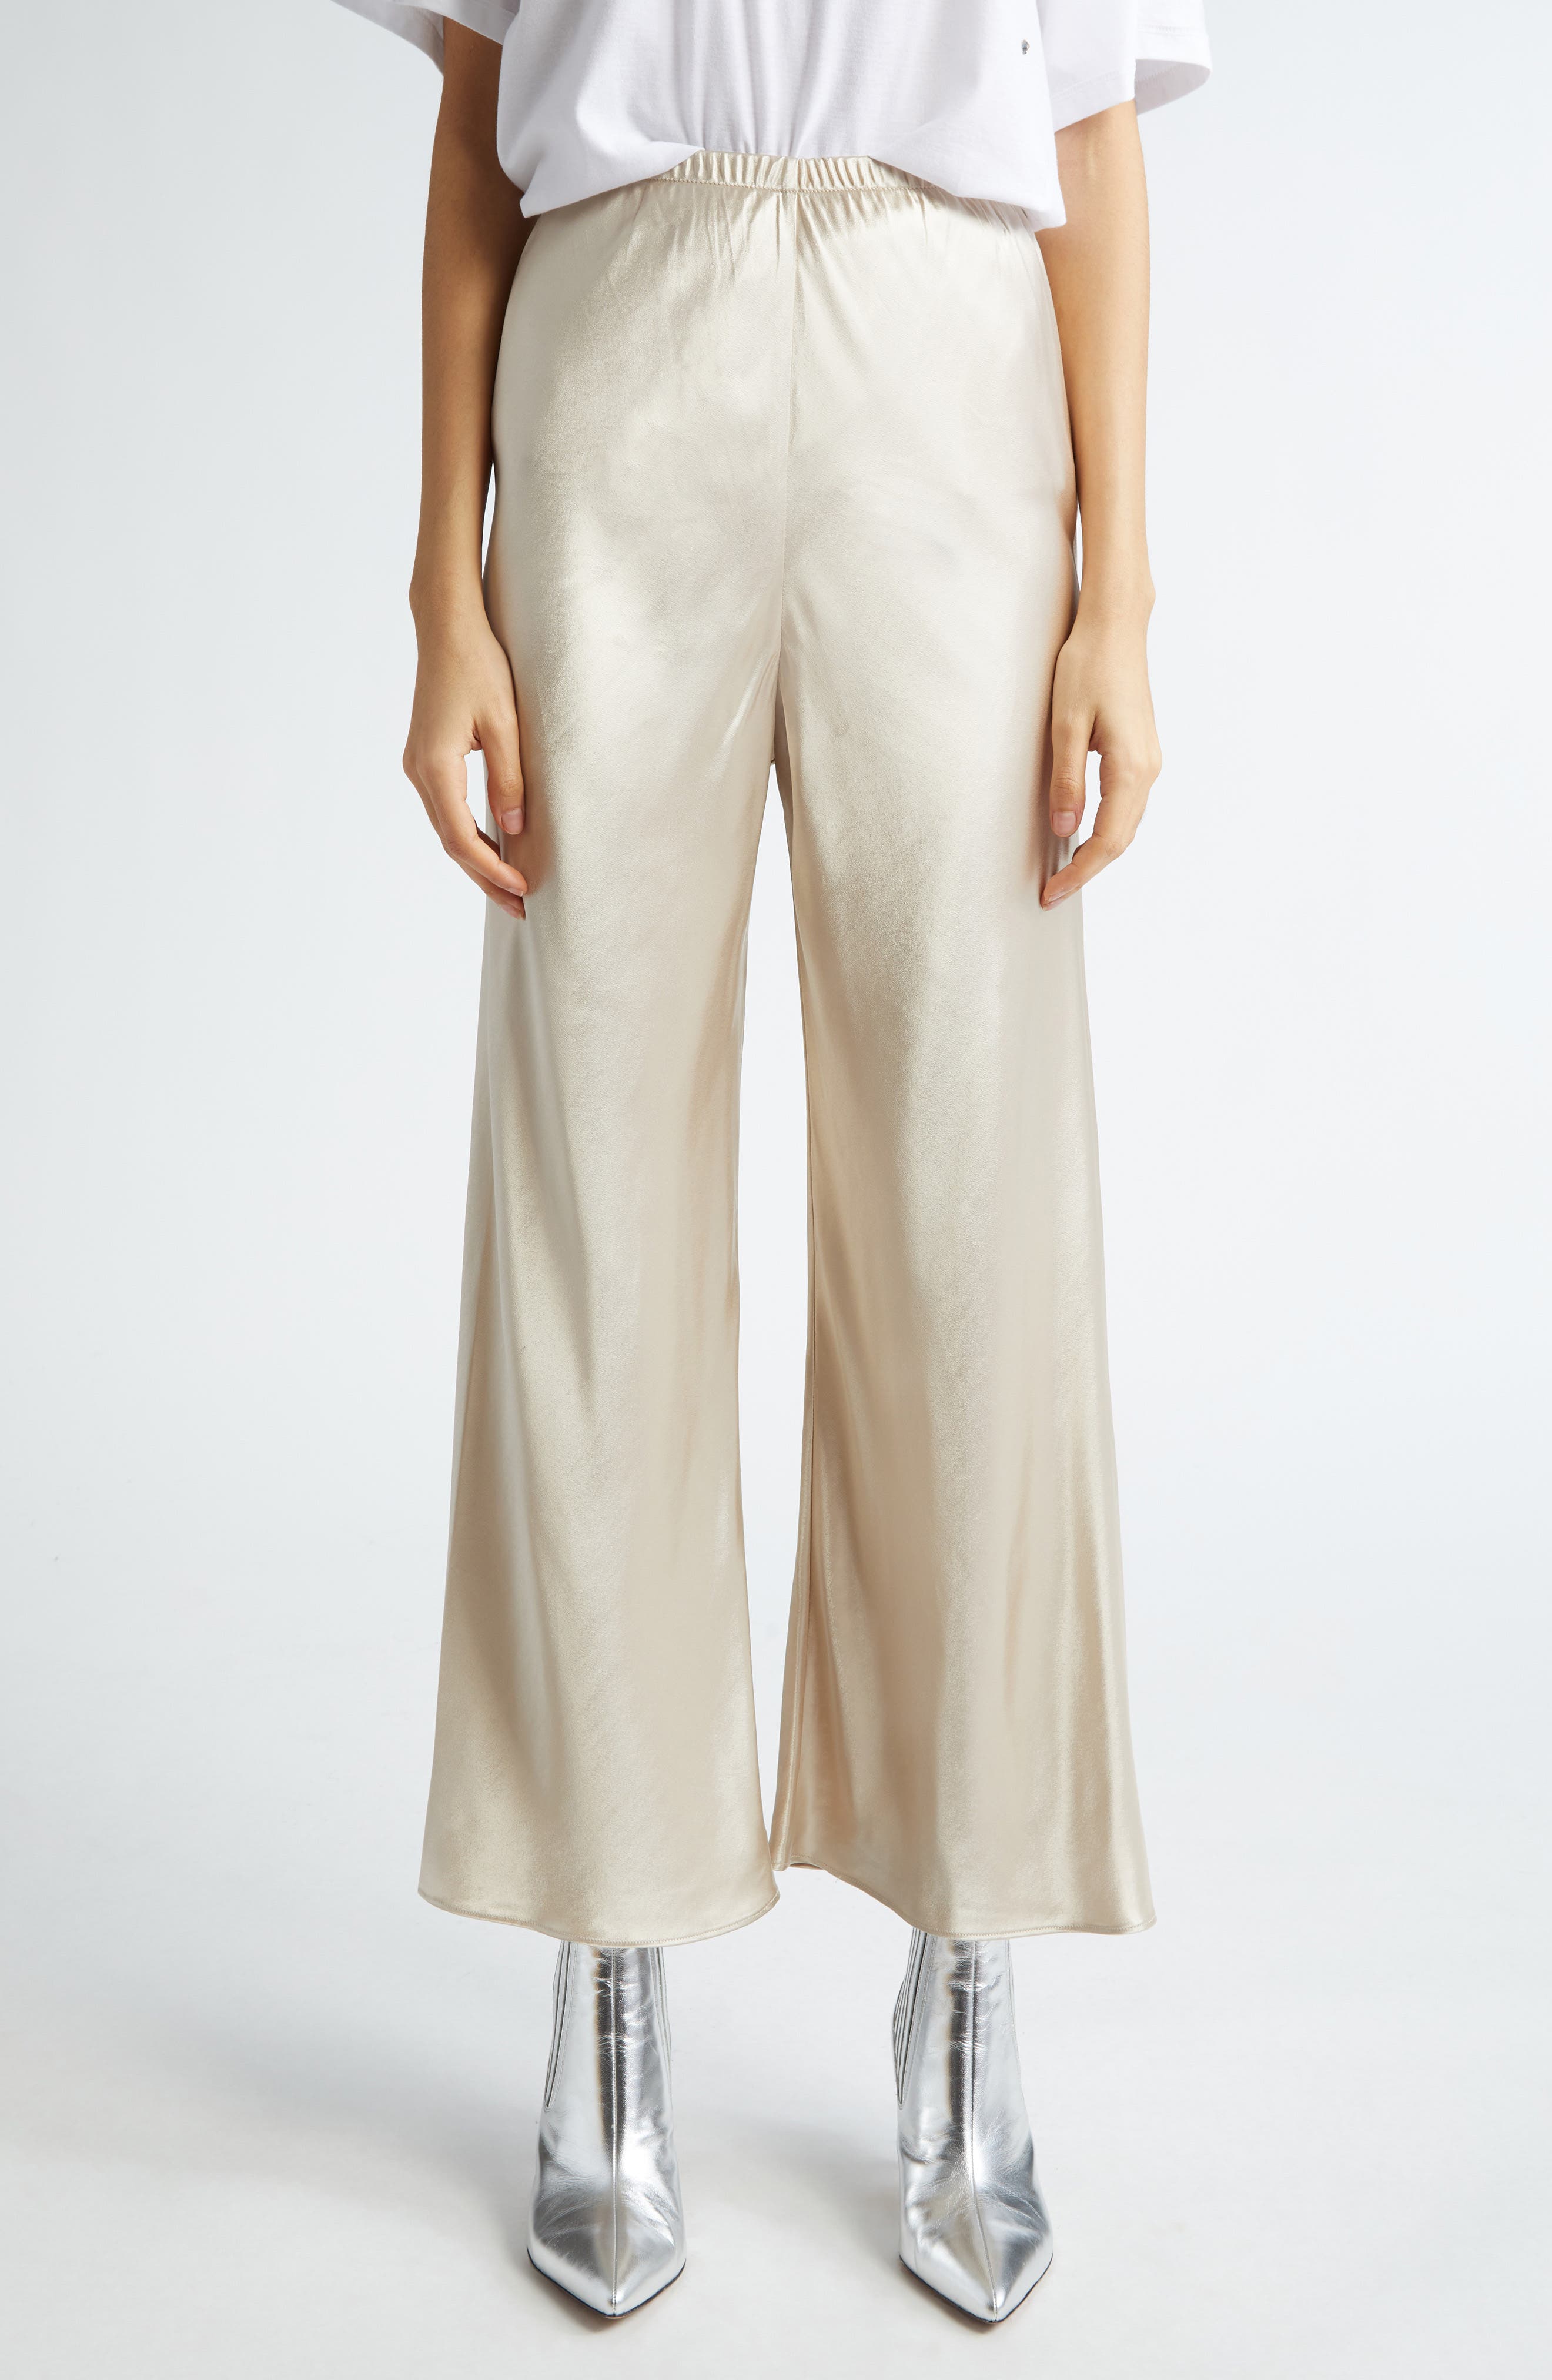 Rochas satin cropped trousers - Green